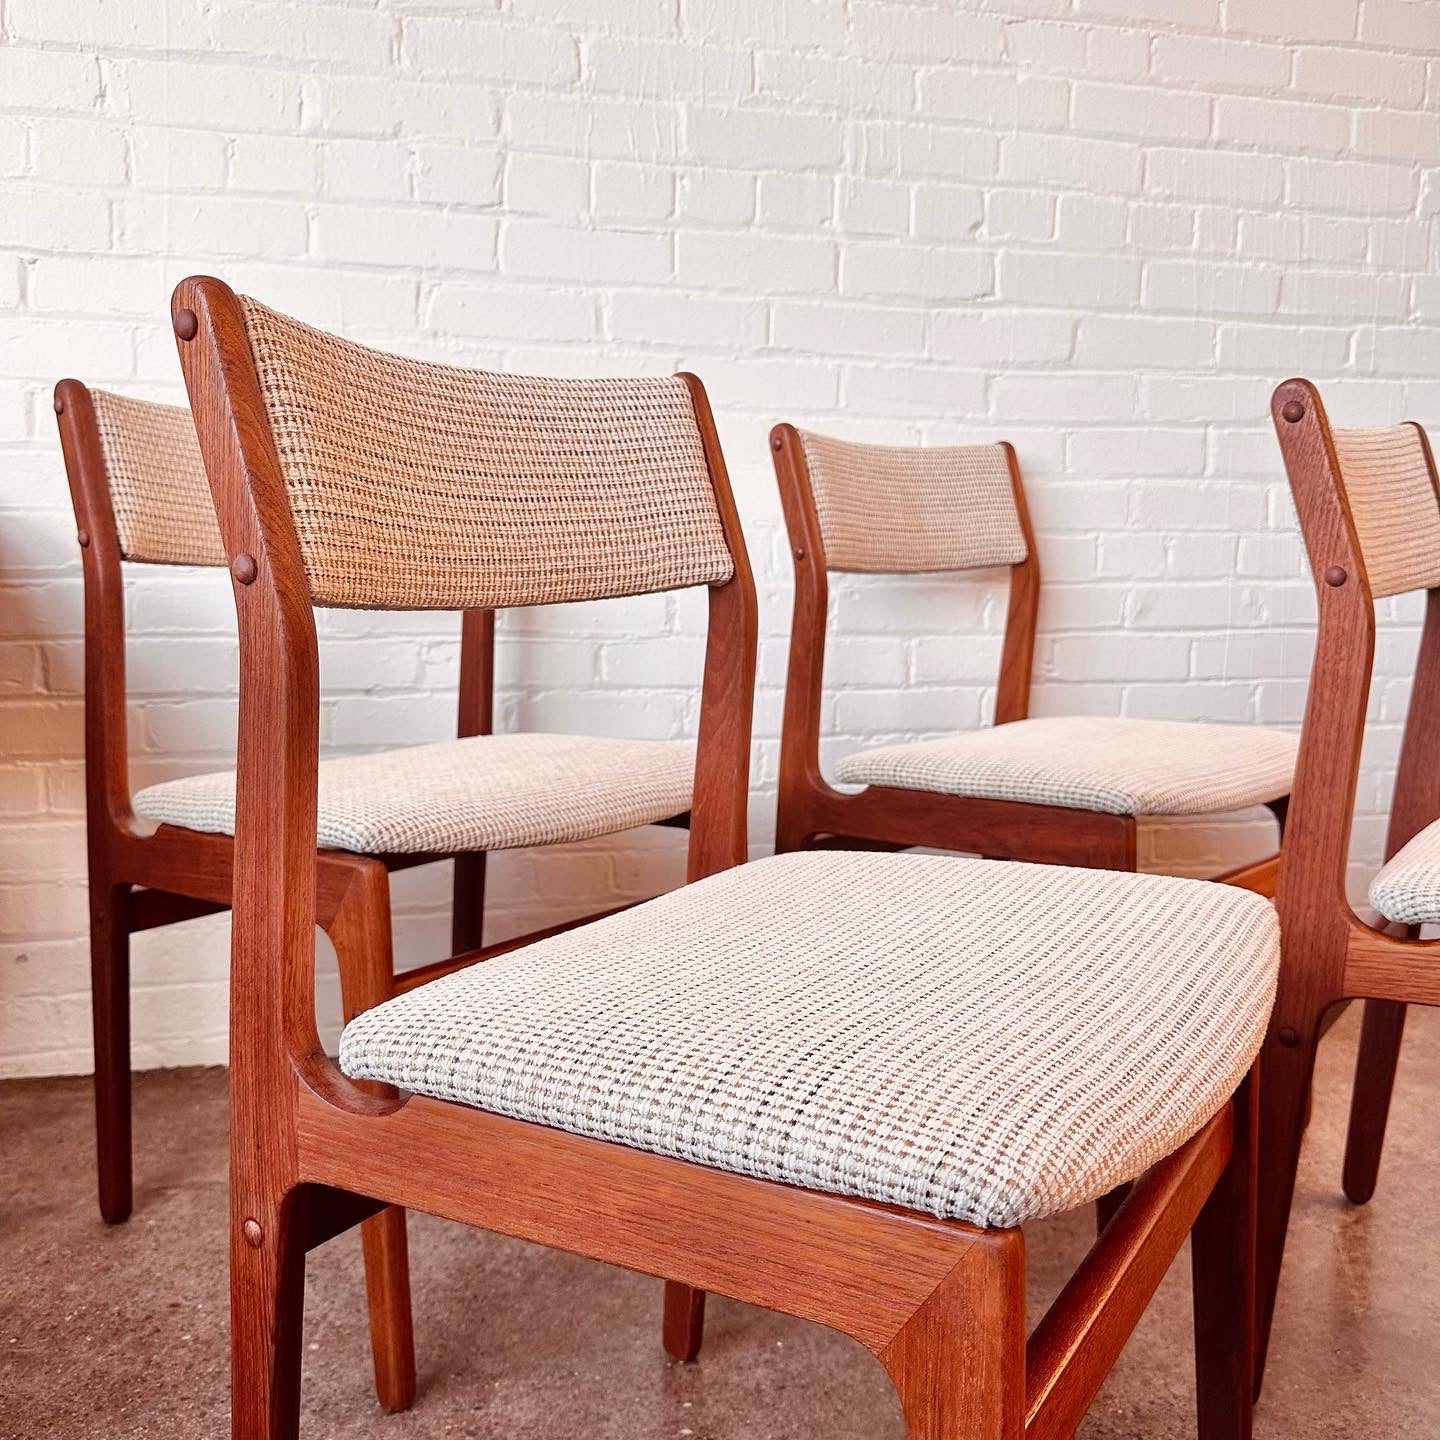 SET OF 4 VINTAGE DANISH MODERN TEAK DINING CHAIRS BY D-SCAN - REUPHOLSTERED AND RESTORED